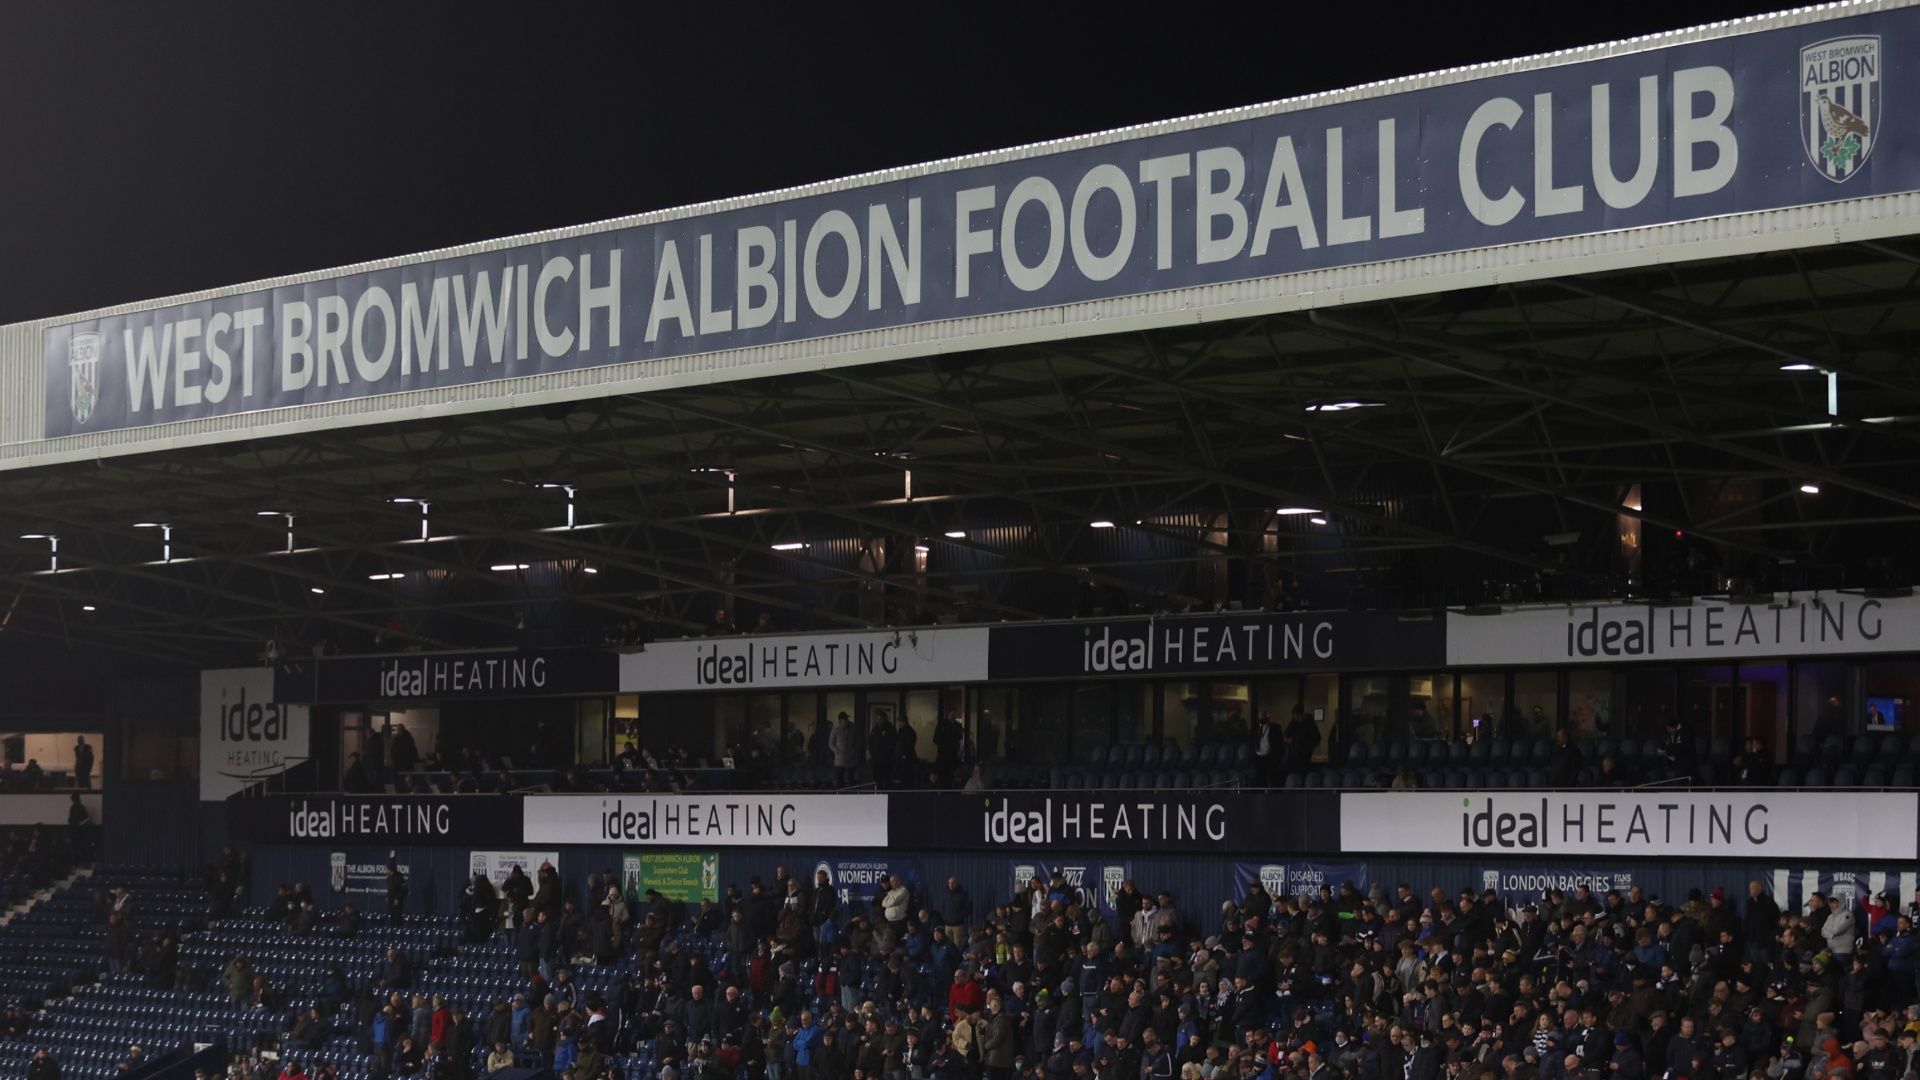 West Brom takeover agreed as Shilen Patel to buy club from